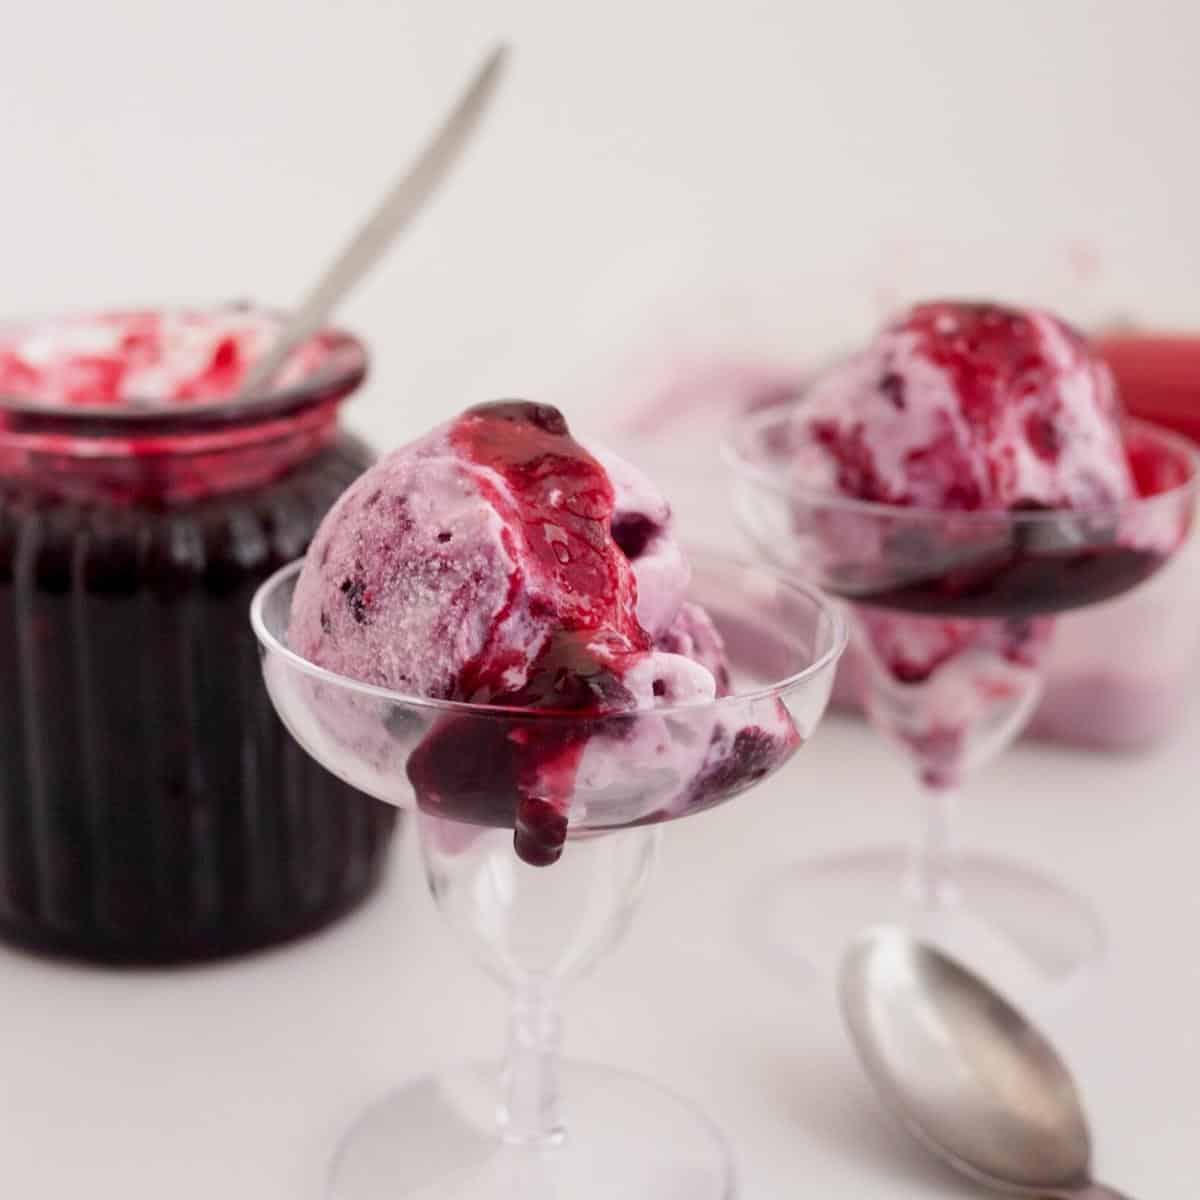 A scoop of cherry ice cream with cherry filling.